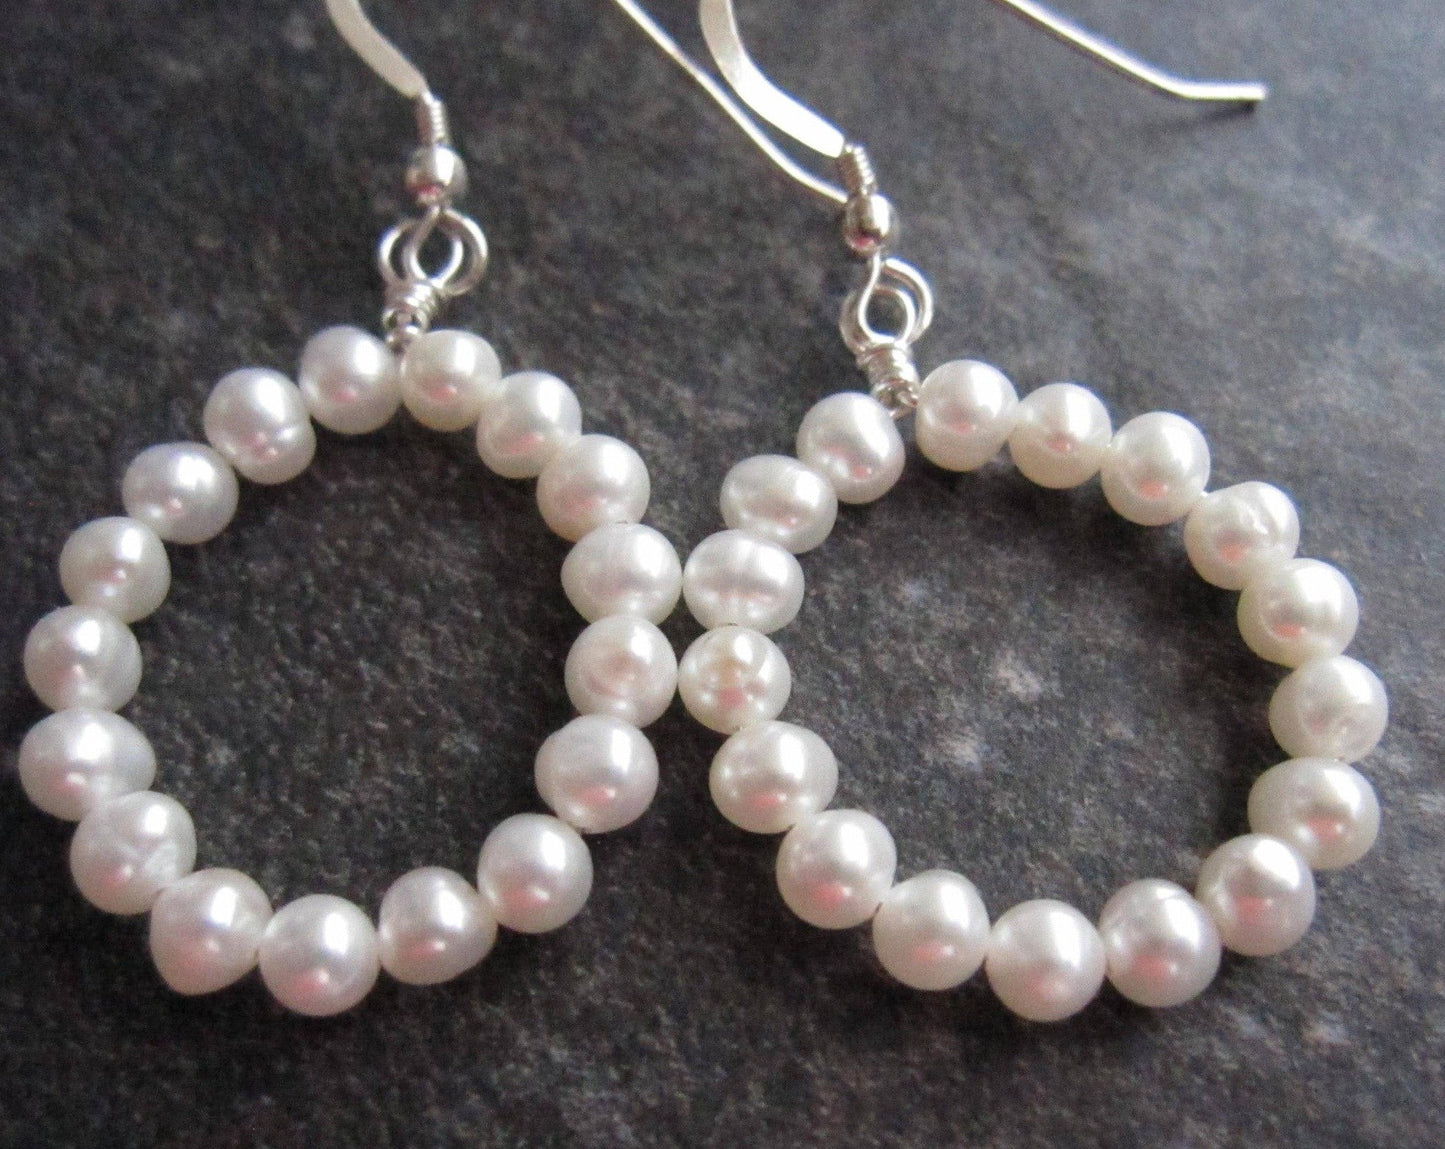 Genuine White Pearl Hoop Earrings made with Sterling Silver & High Quality white Freshwater Cultured Pearls. 